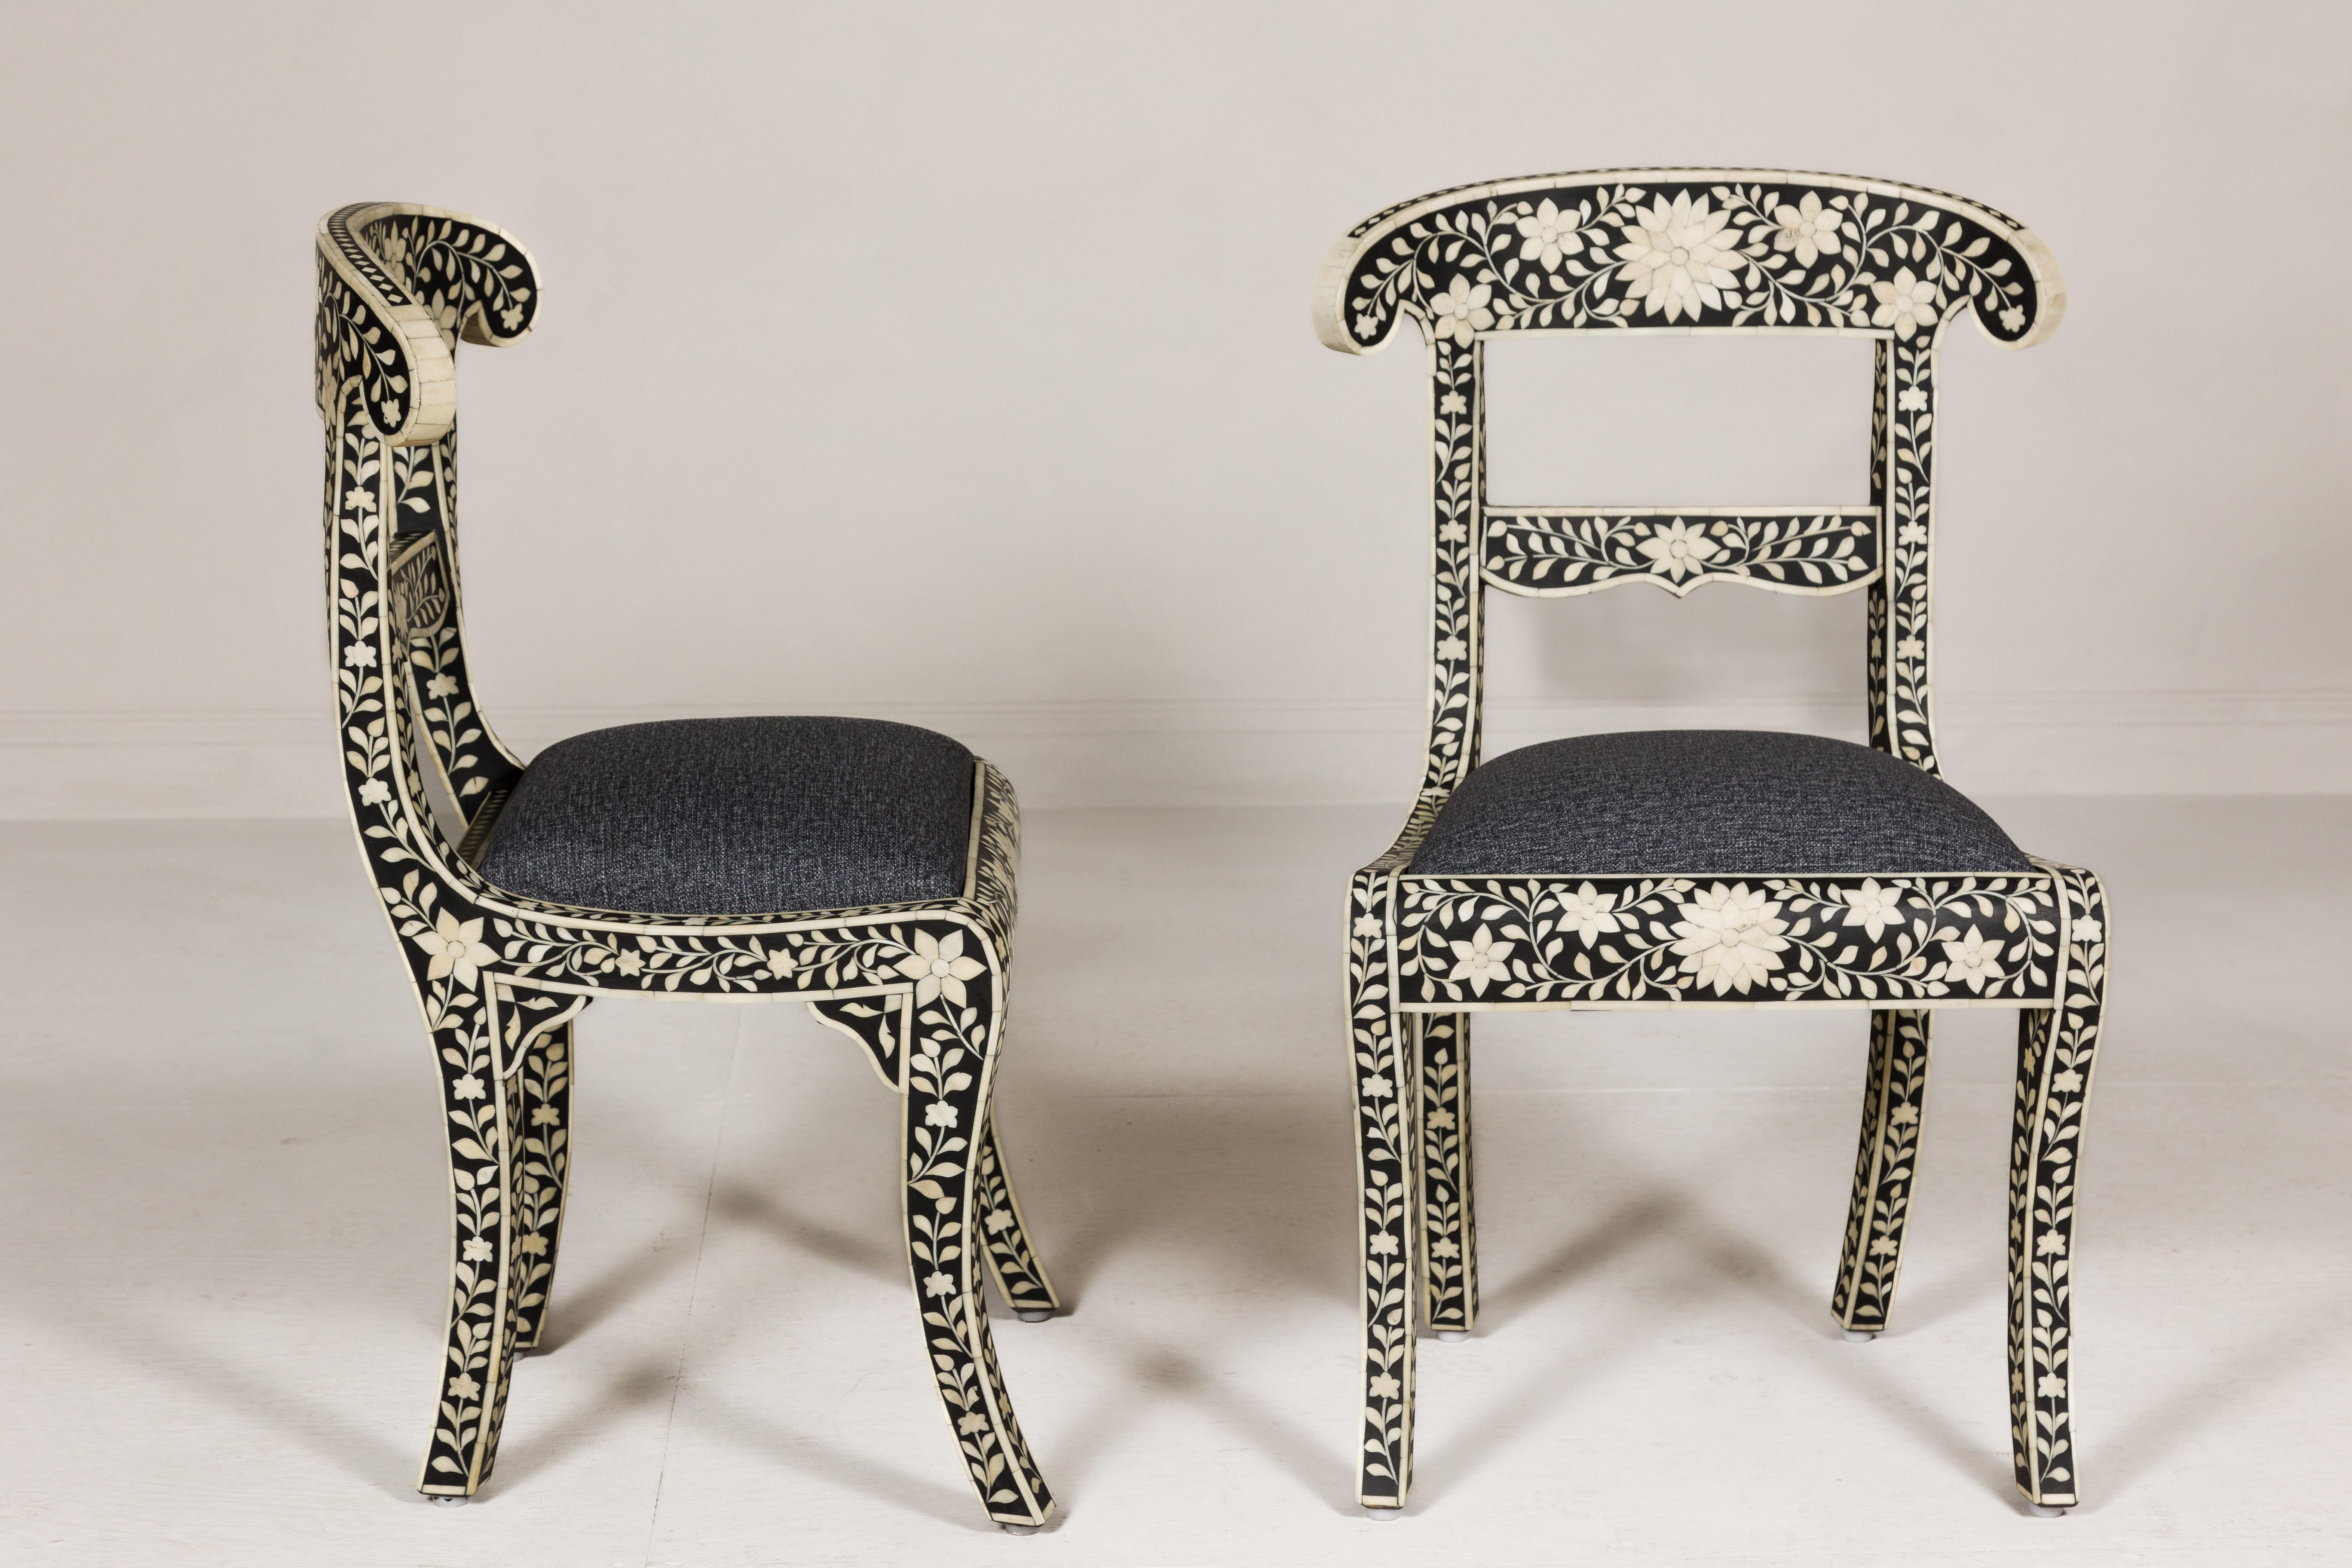 Anglo-Indian Style Ebonized Side Chairs with Floral Themed Bone Inlay, a Pair For Sale 2